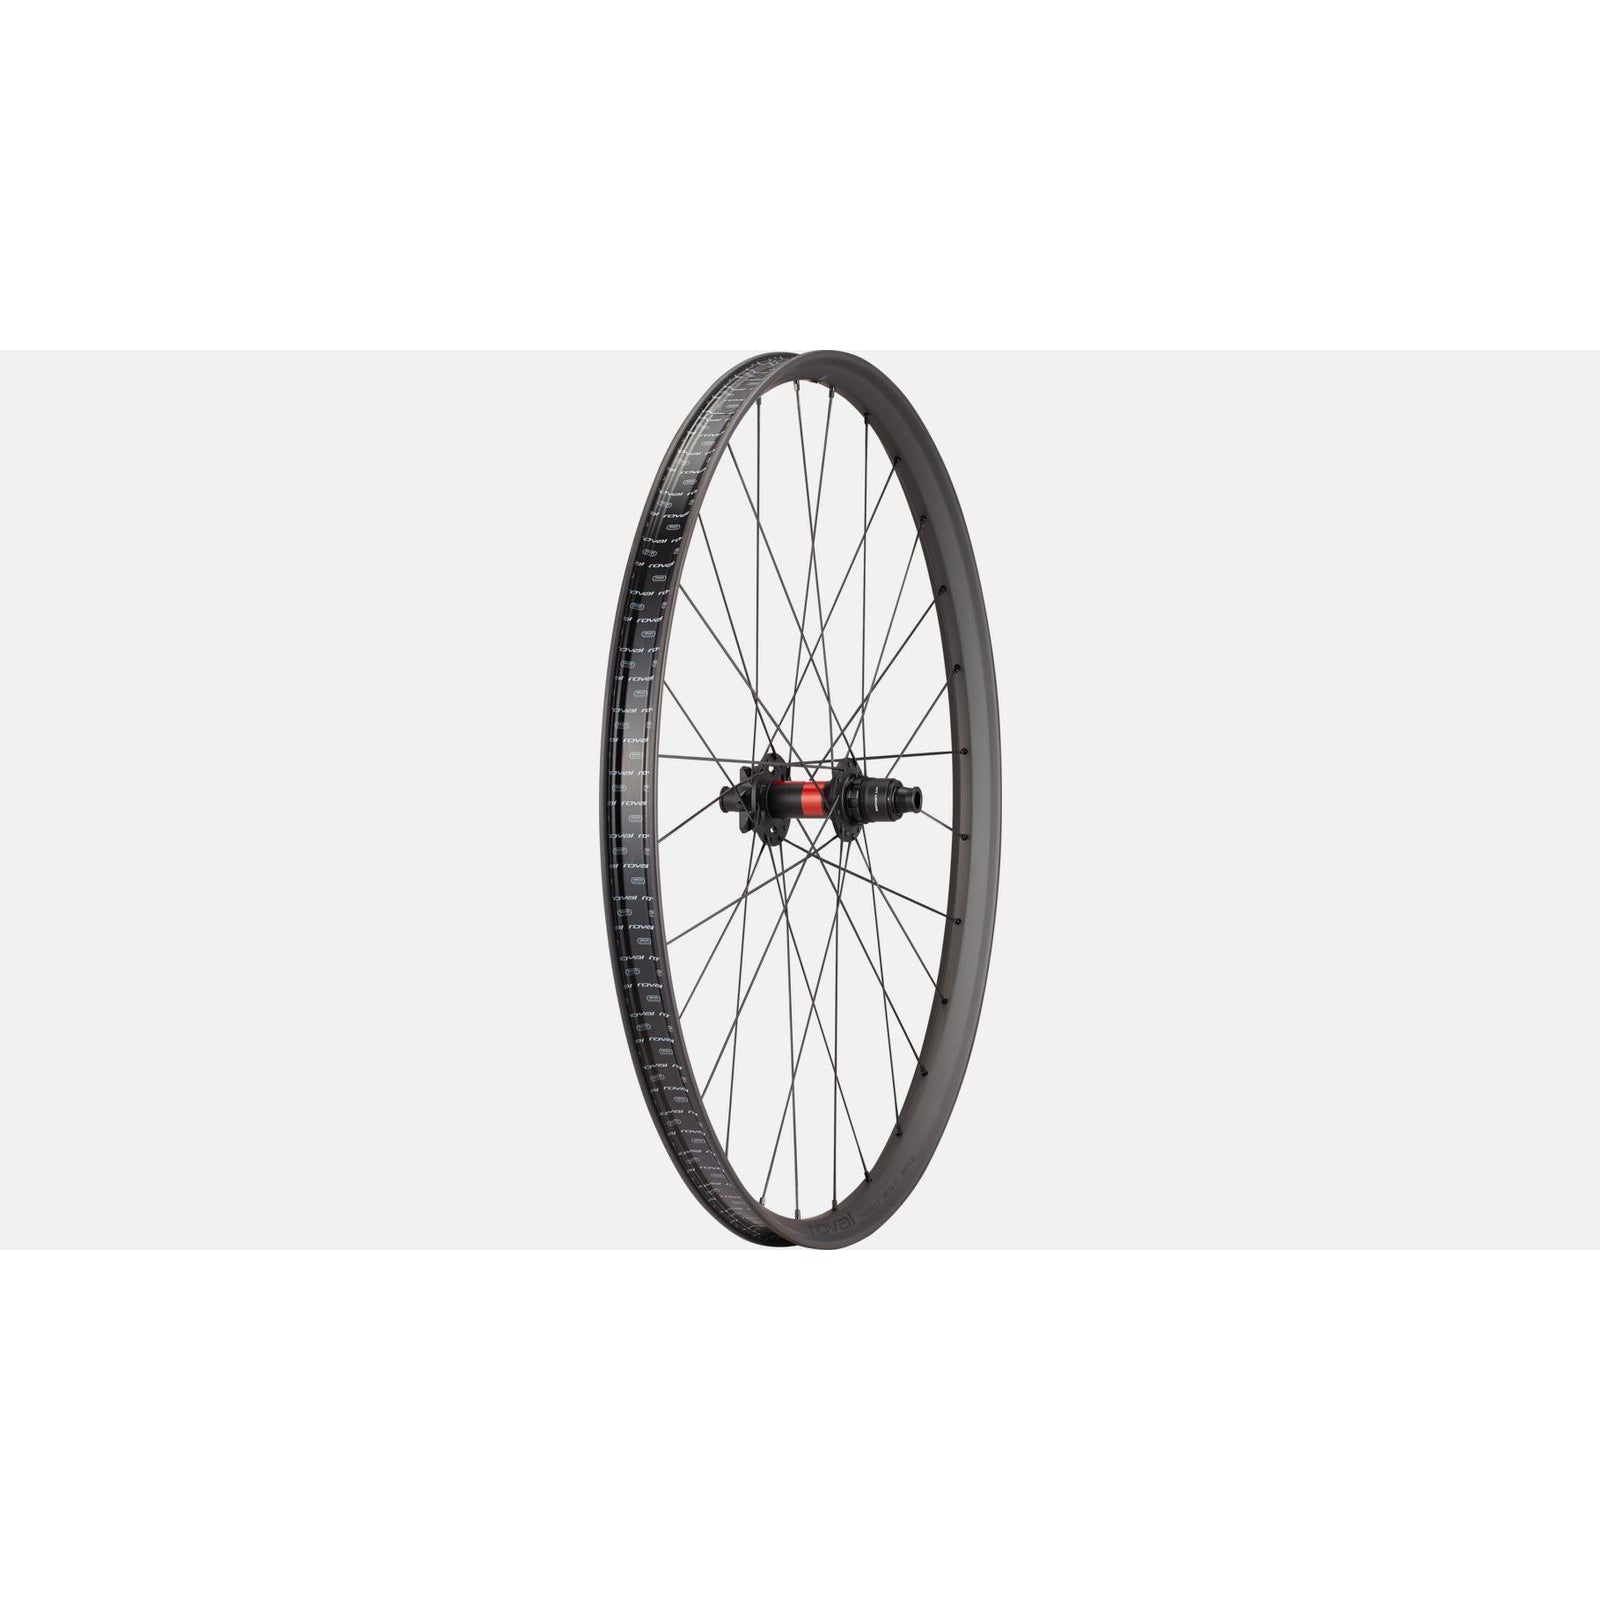 Specialized Roval Traverse SL II 240 6B - Bicycle Rims - Bicycle Warehouse